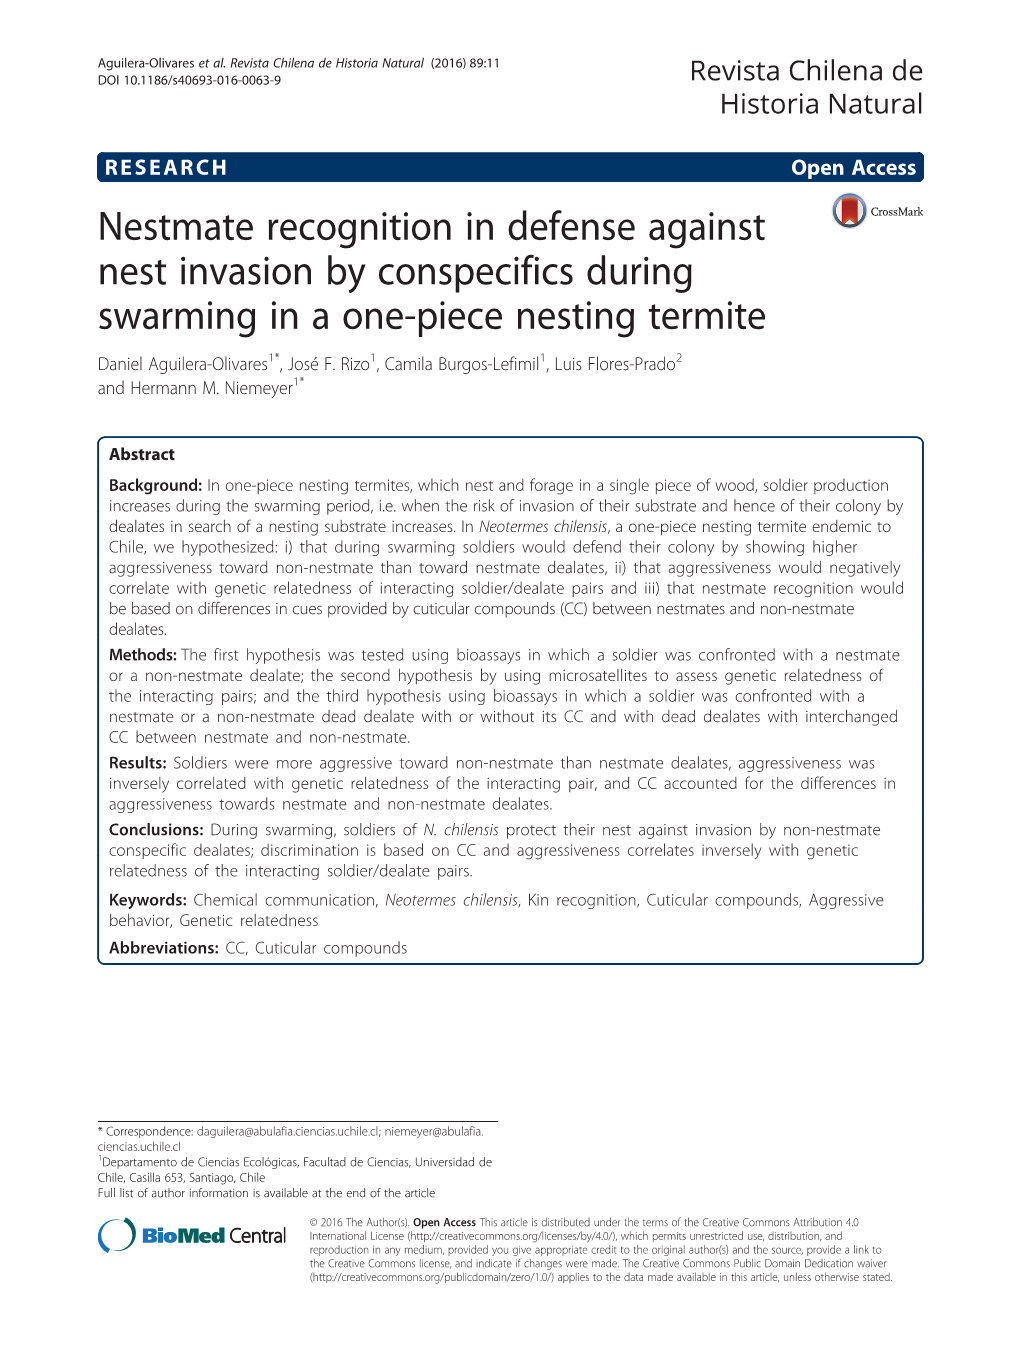 Nestmate Recognition in Defense Against Nest Invasion by Conspecifics During Swarming in a One-Piece Nesting Termite Daniel Aguilera-Olivares1*, José F